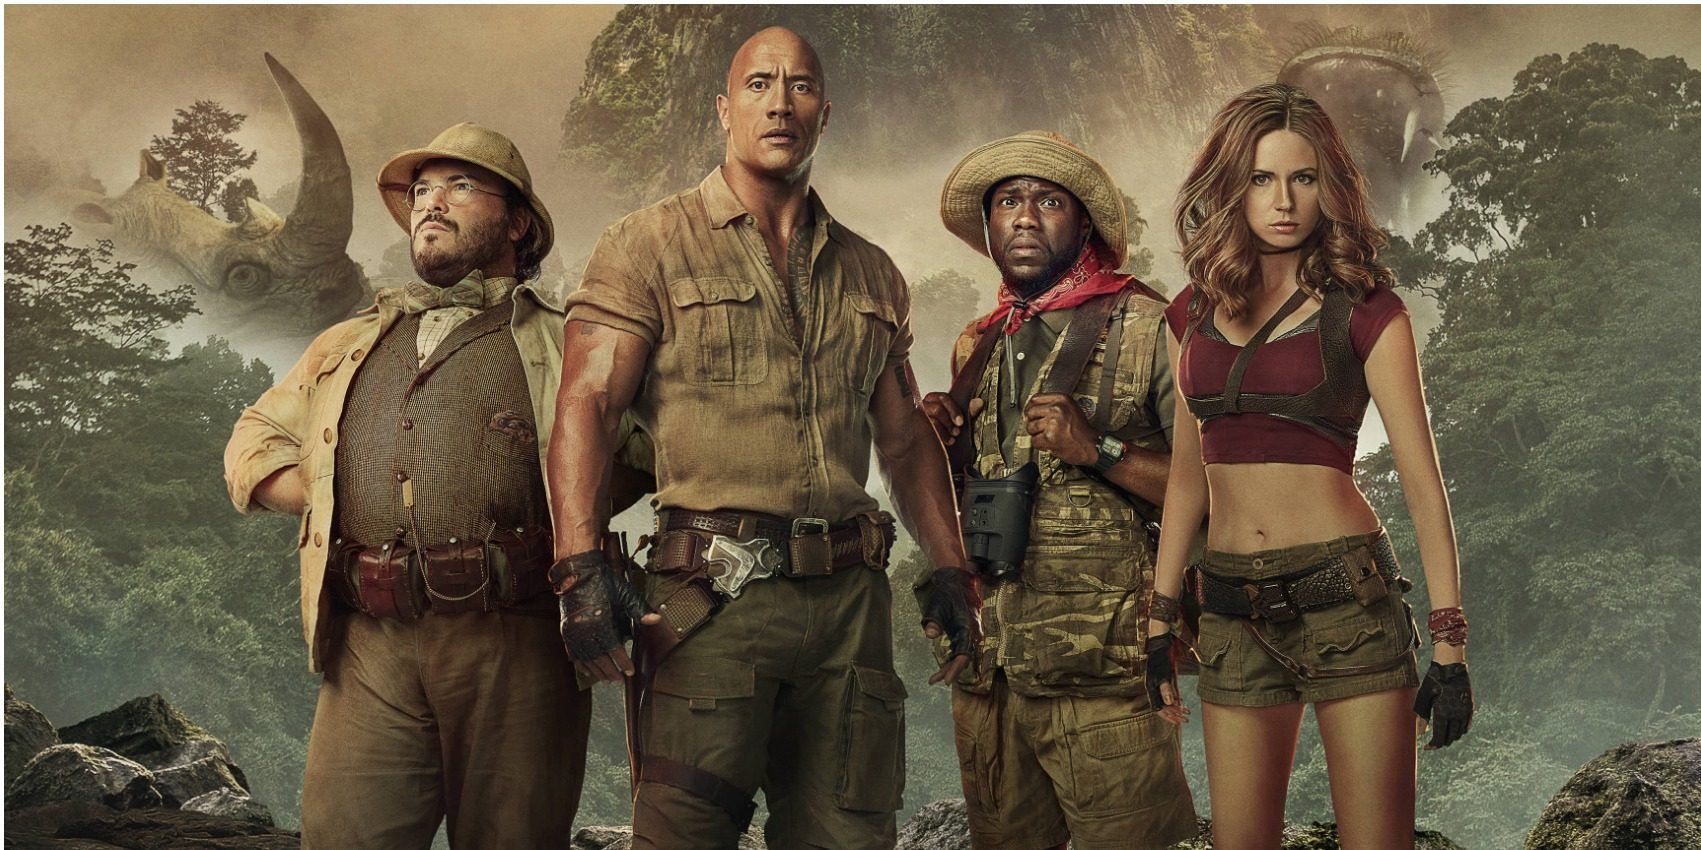 A promotional image of Jumanji: Welcome to the Jungle, featuring the four main leads